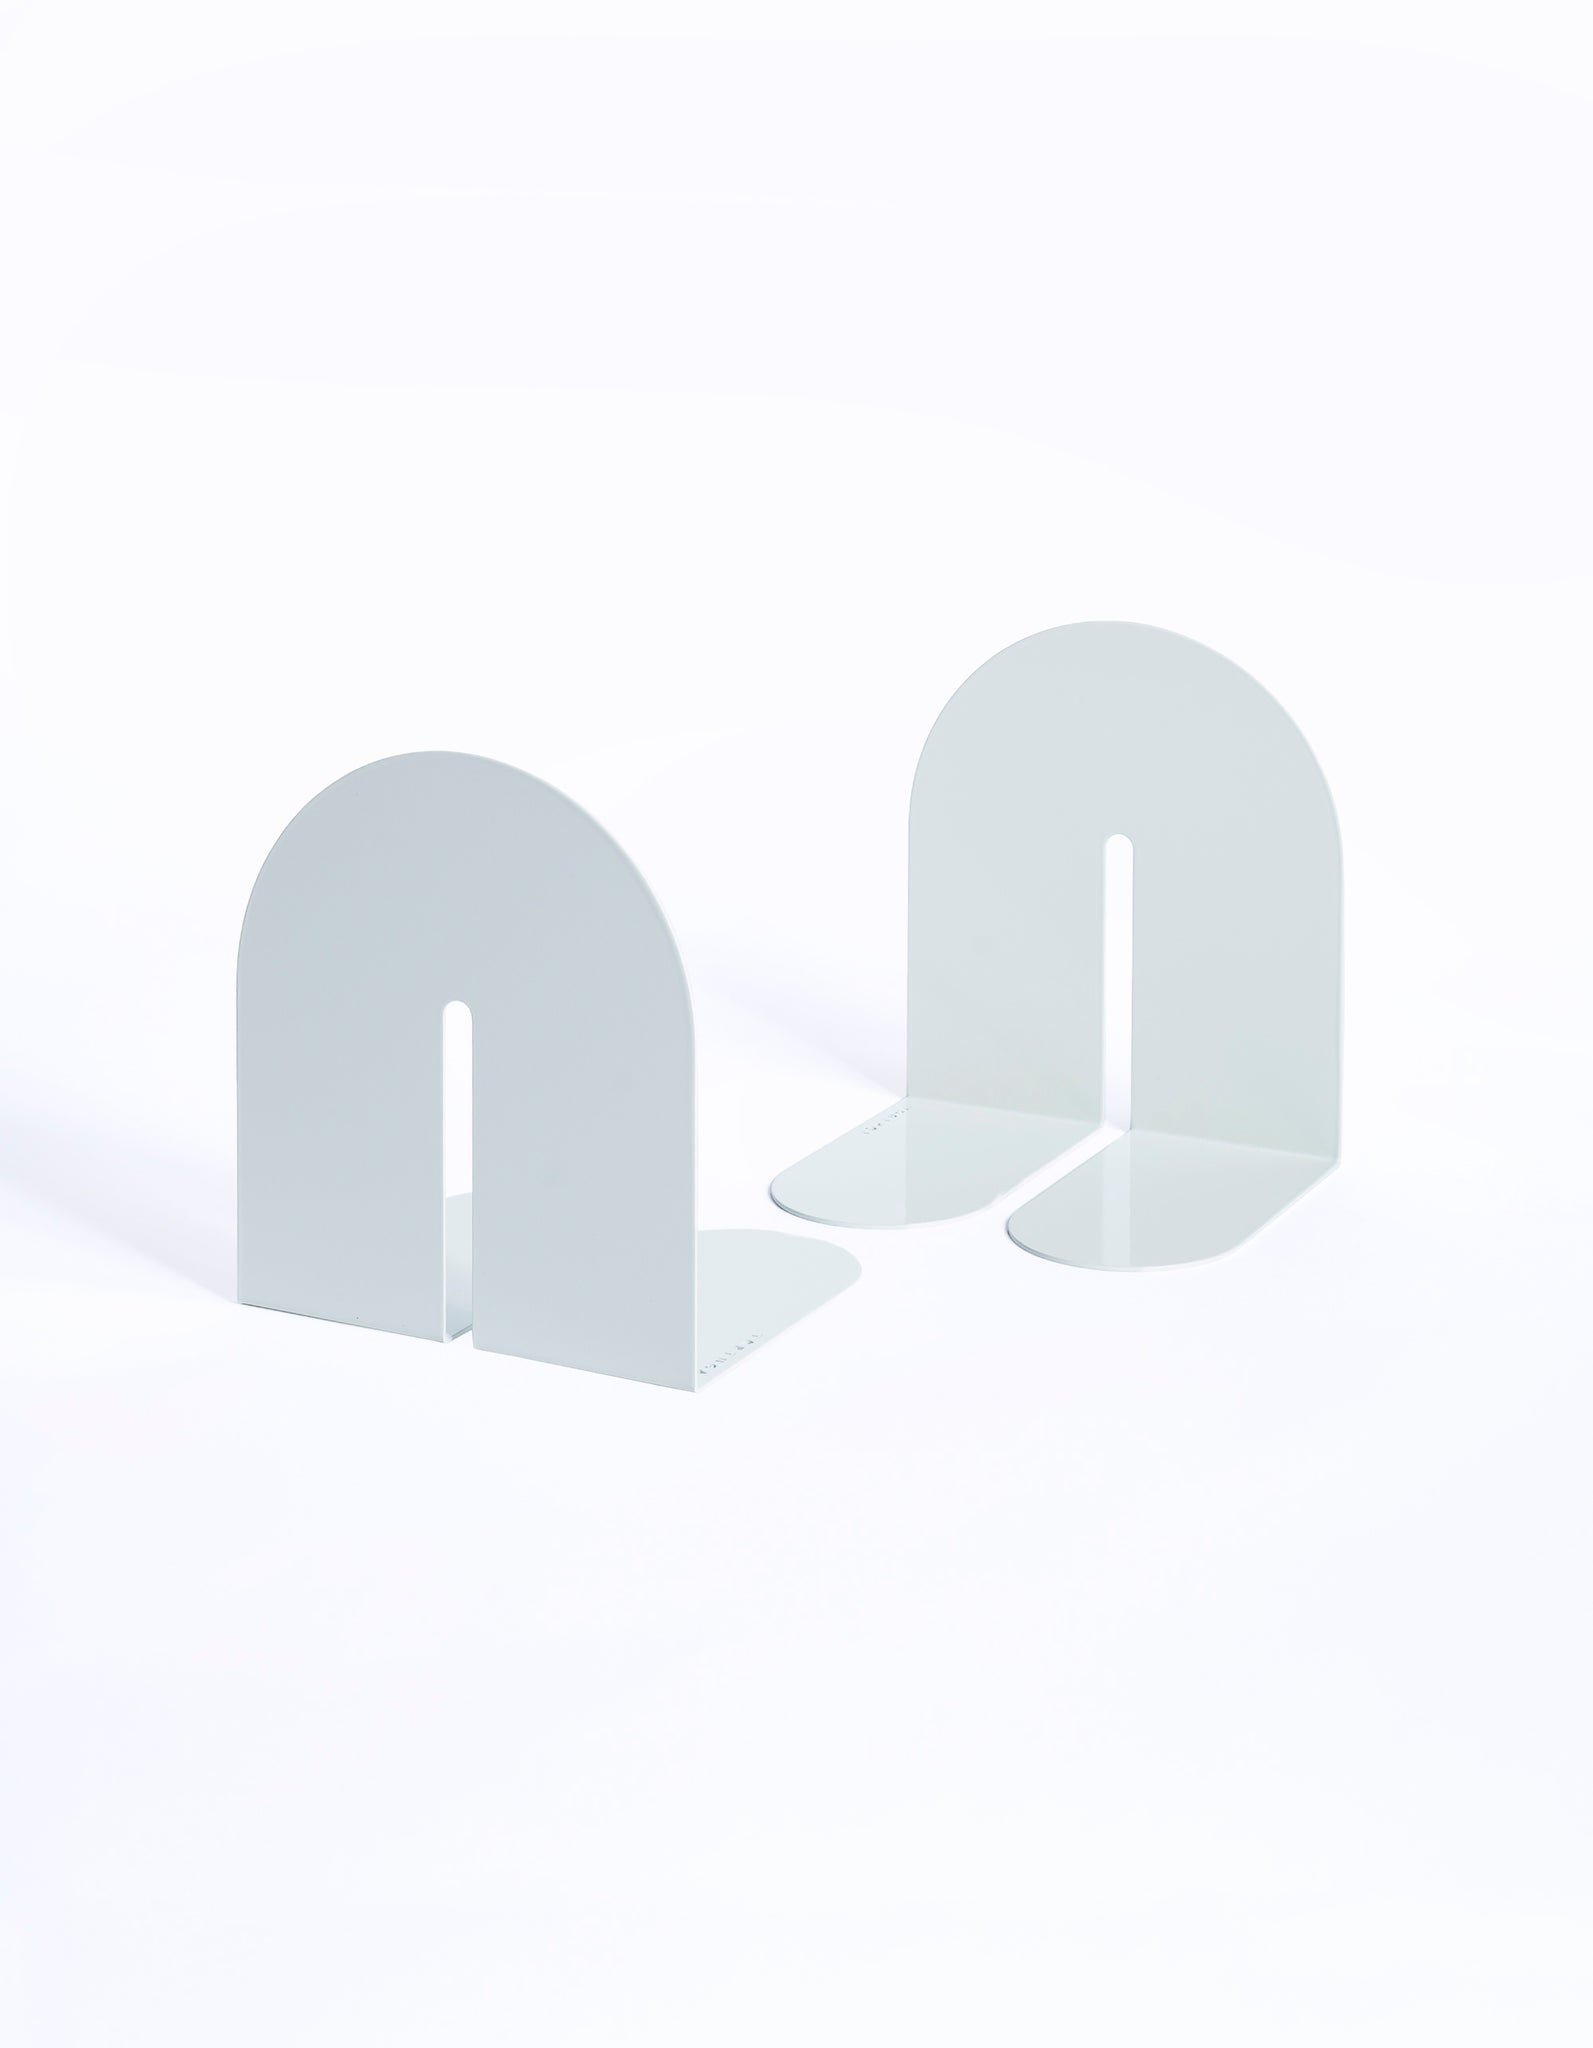 Dumbo Bookend Pair - Single Arc White